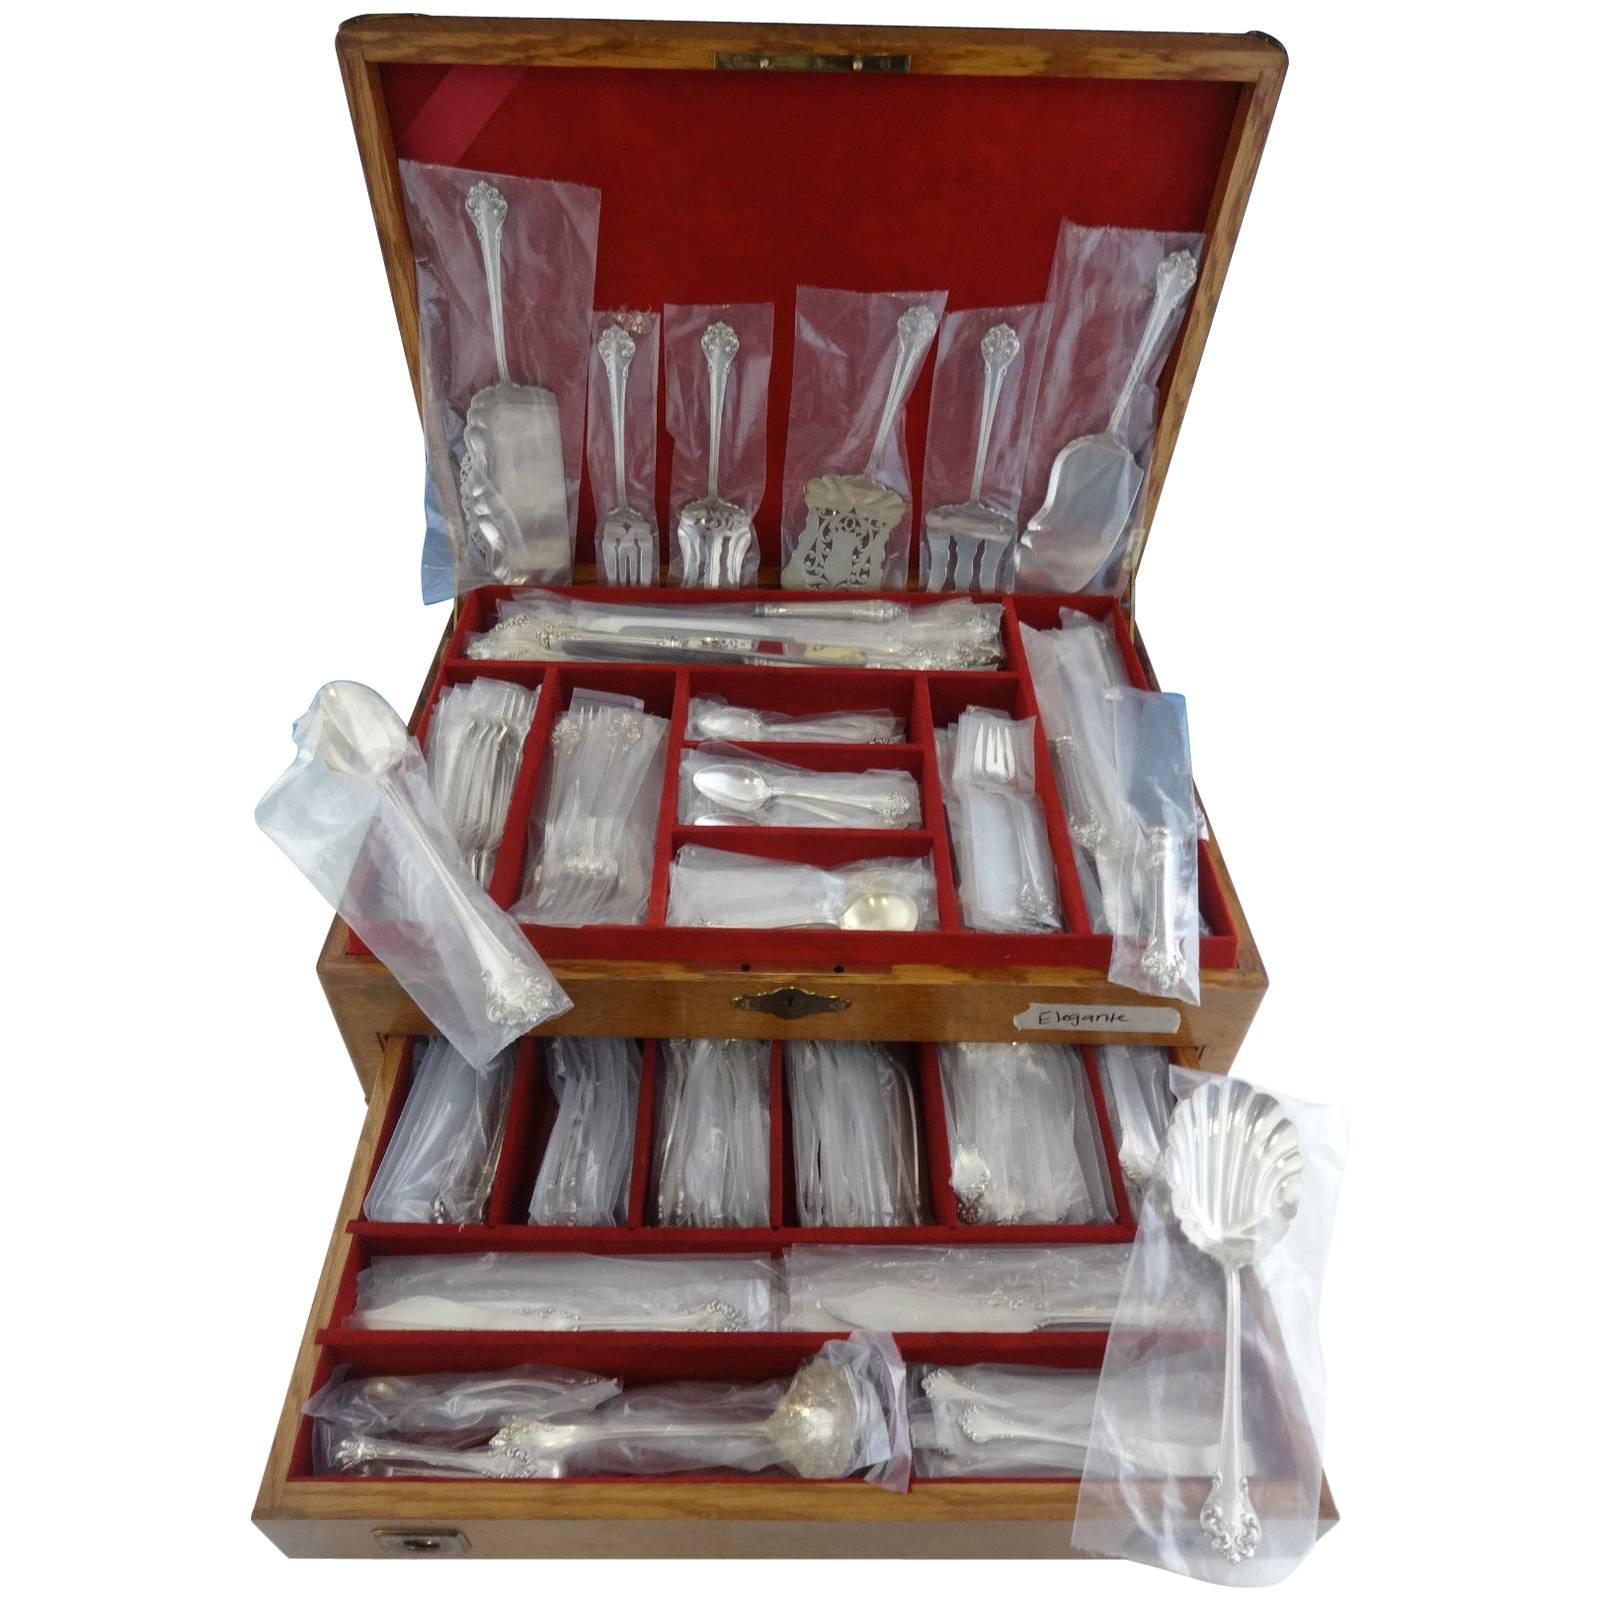 Stunning timeless Elegante by Reed & Barton circa 1900 sterling silver flatware set of 245 pieces. This truly elegant flatware cutlery set includes:

36 dinner knives, 9 7/8